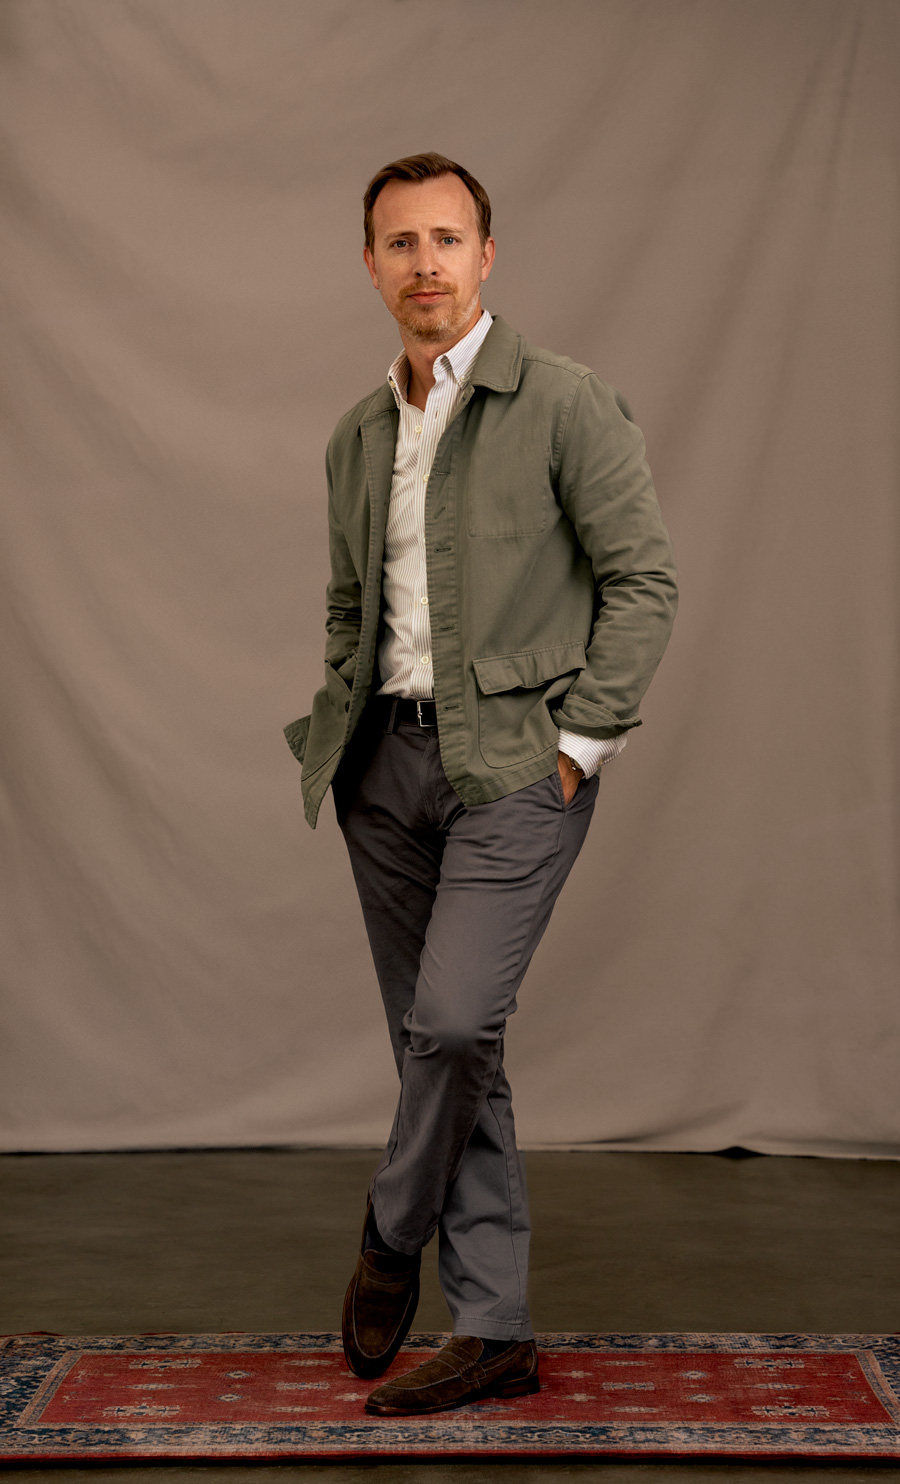 A man wearing an olive green chore coat as a blazer alternative on a business casual outfit featuring a white striped dress shirt, gray chino khakis, and suede loafers